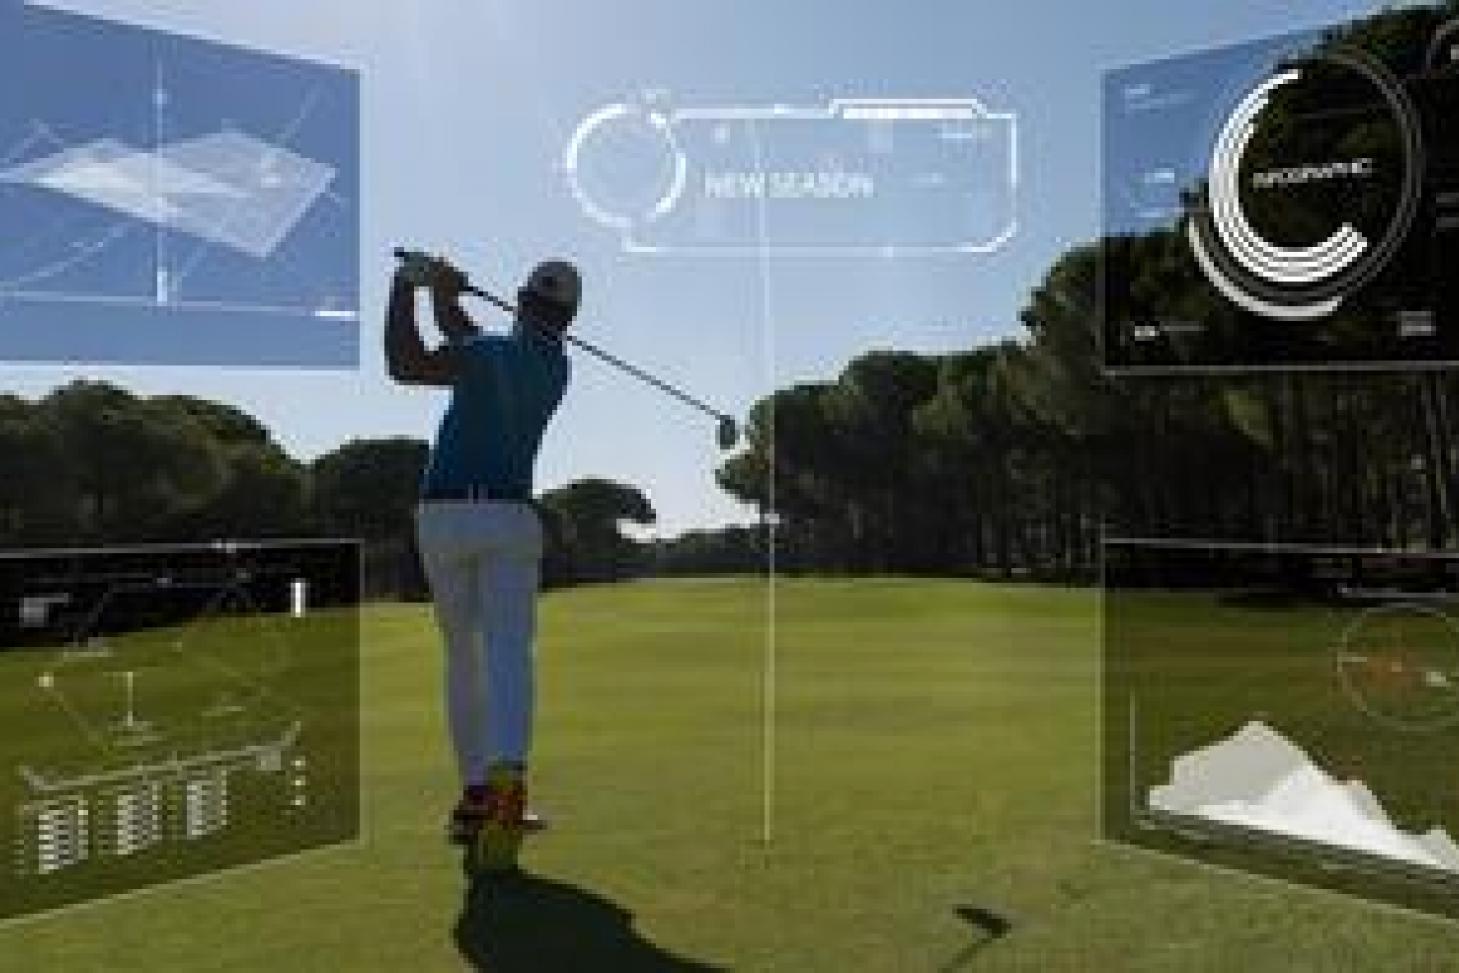 A man on a golf course swinging a club with translucent data streams on the for corners of the picutre.